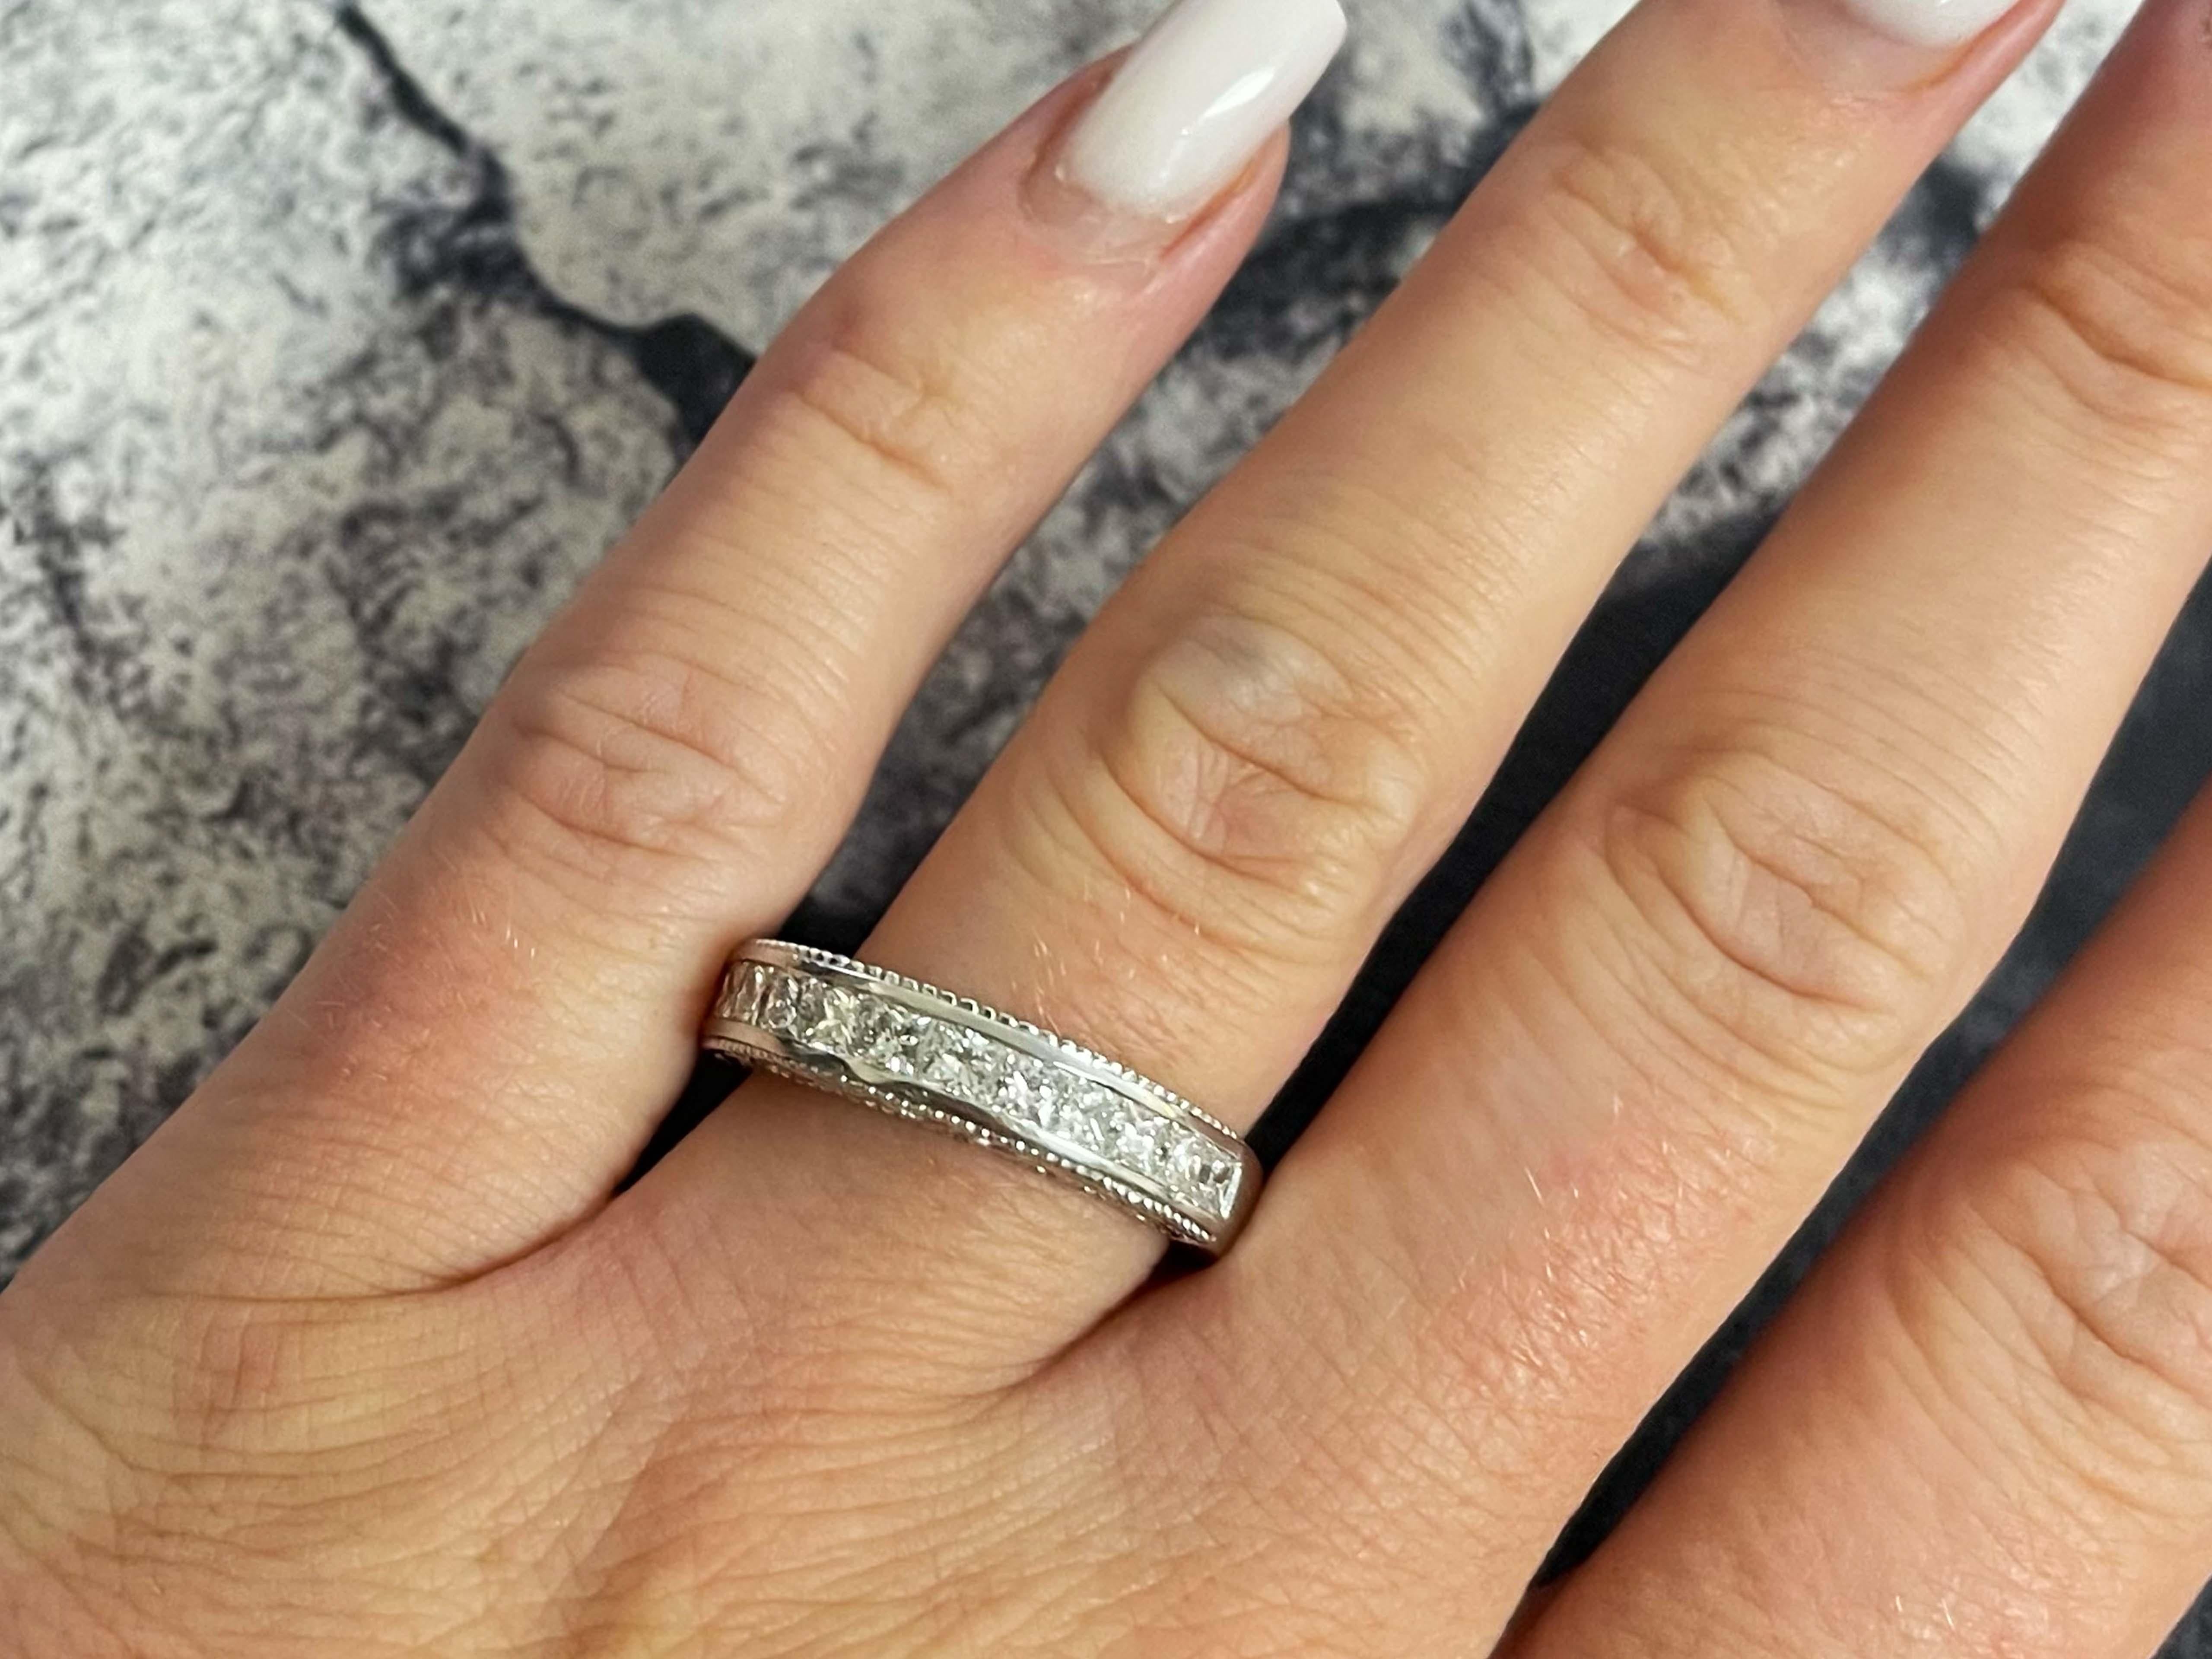 Item Specifications:

Metal: Platinum 900
Diamond Count: 12 princess cut

Total Diamond Carat Weight: ~1.00 carats 

Diamond Color: G-H

Diamond Clarity: VS-SI

Ring Size: 9.25

Total Weight: 8.6 Grams

Condition: NEW